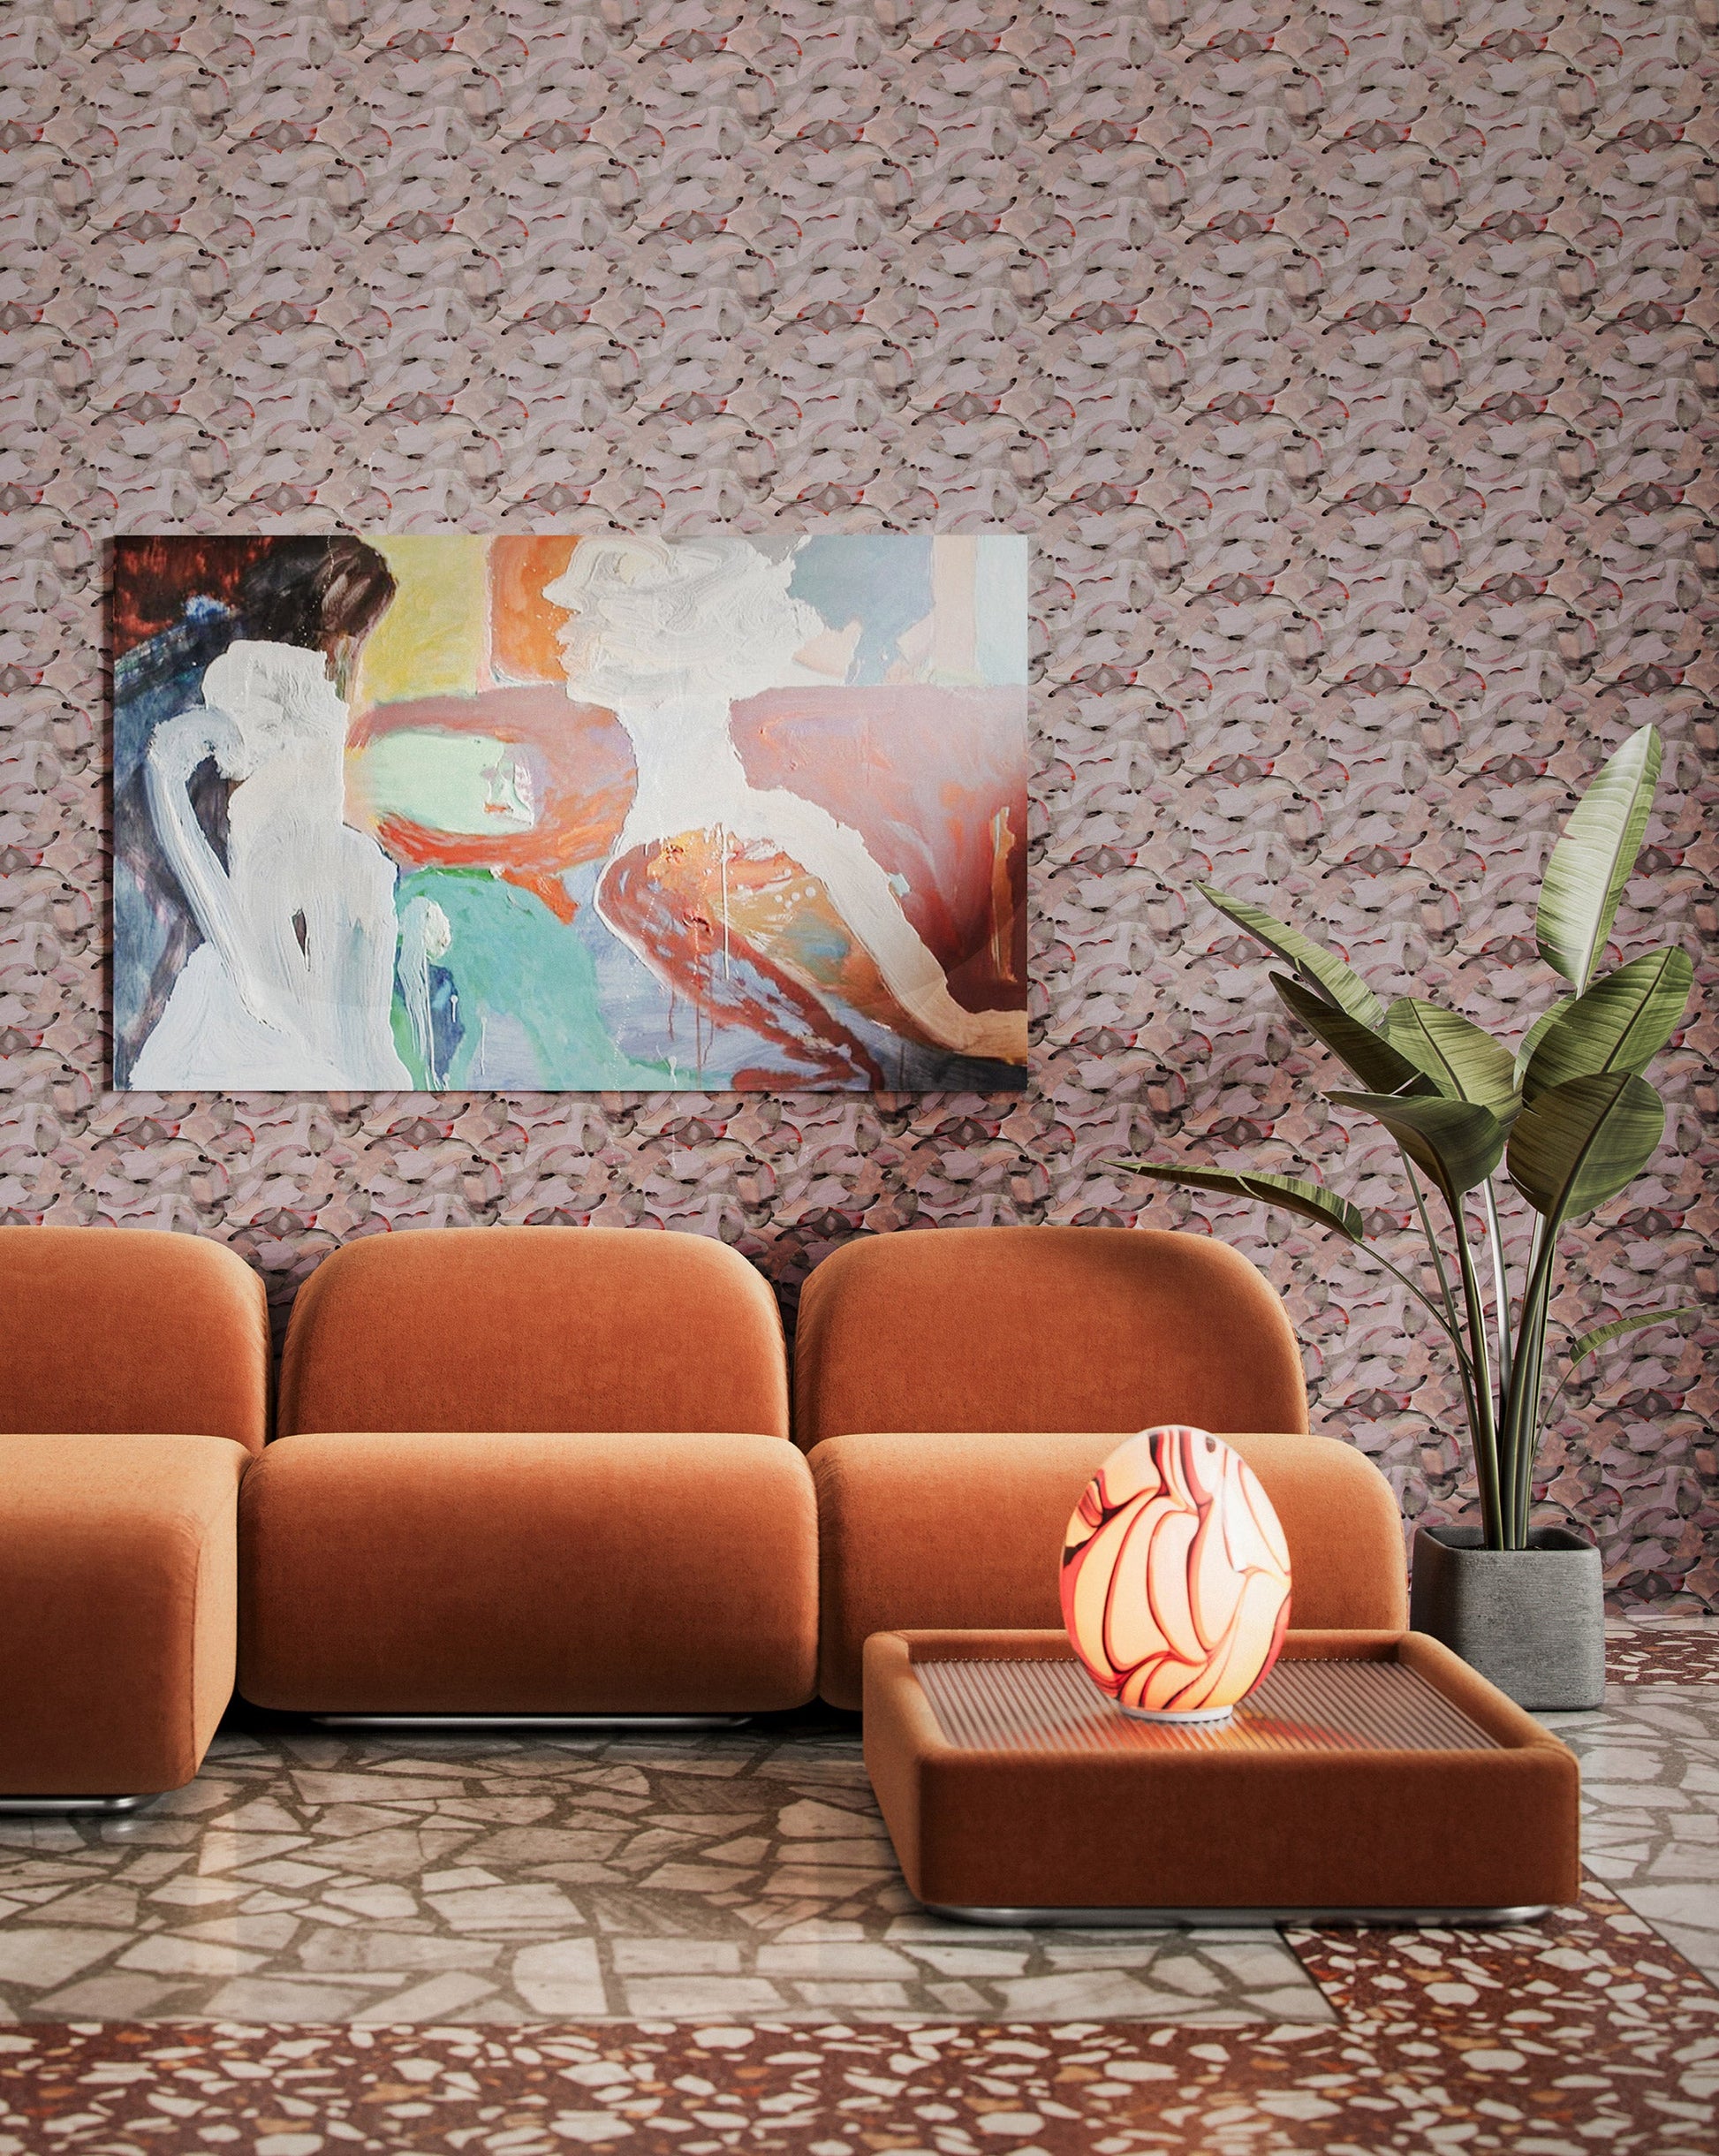 Eskayel's Orbs wallpaper in a multicolored mauve hue is installed in a living room.